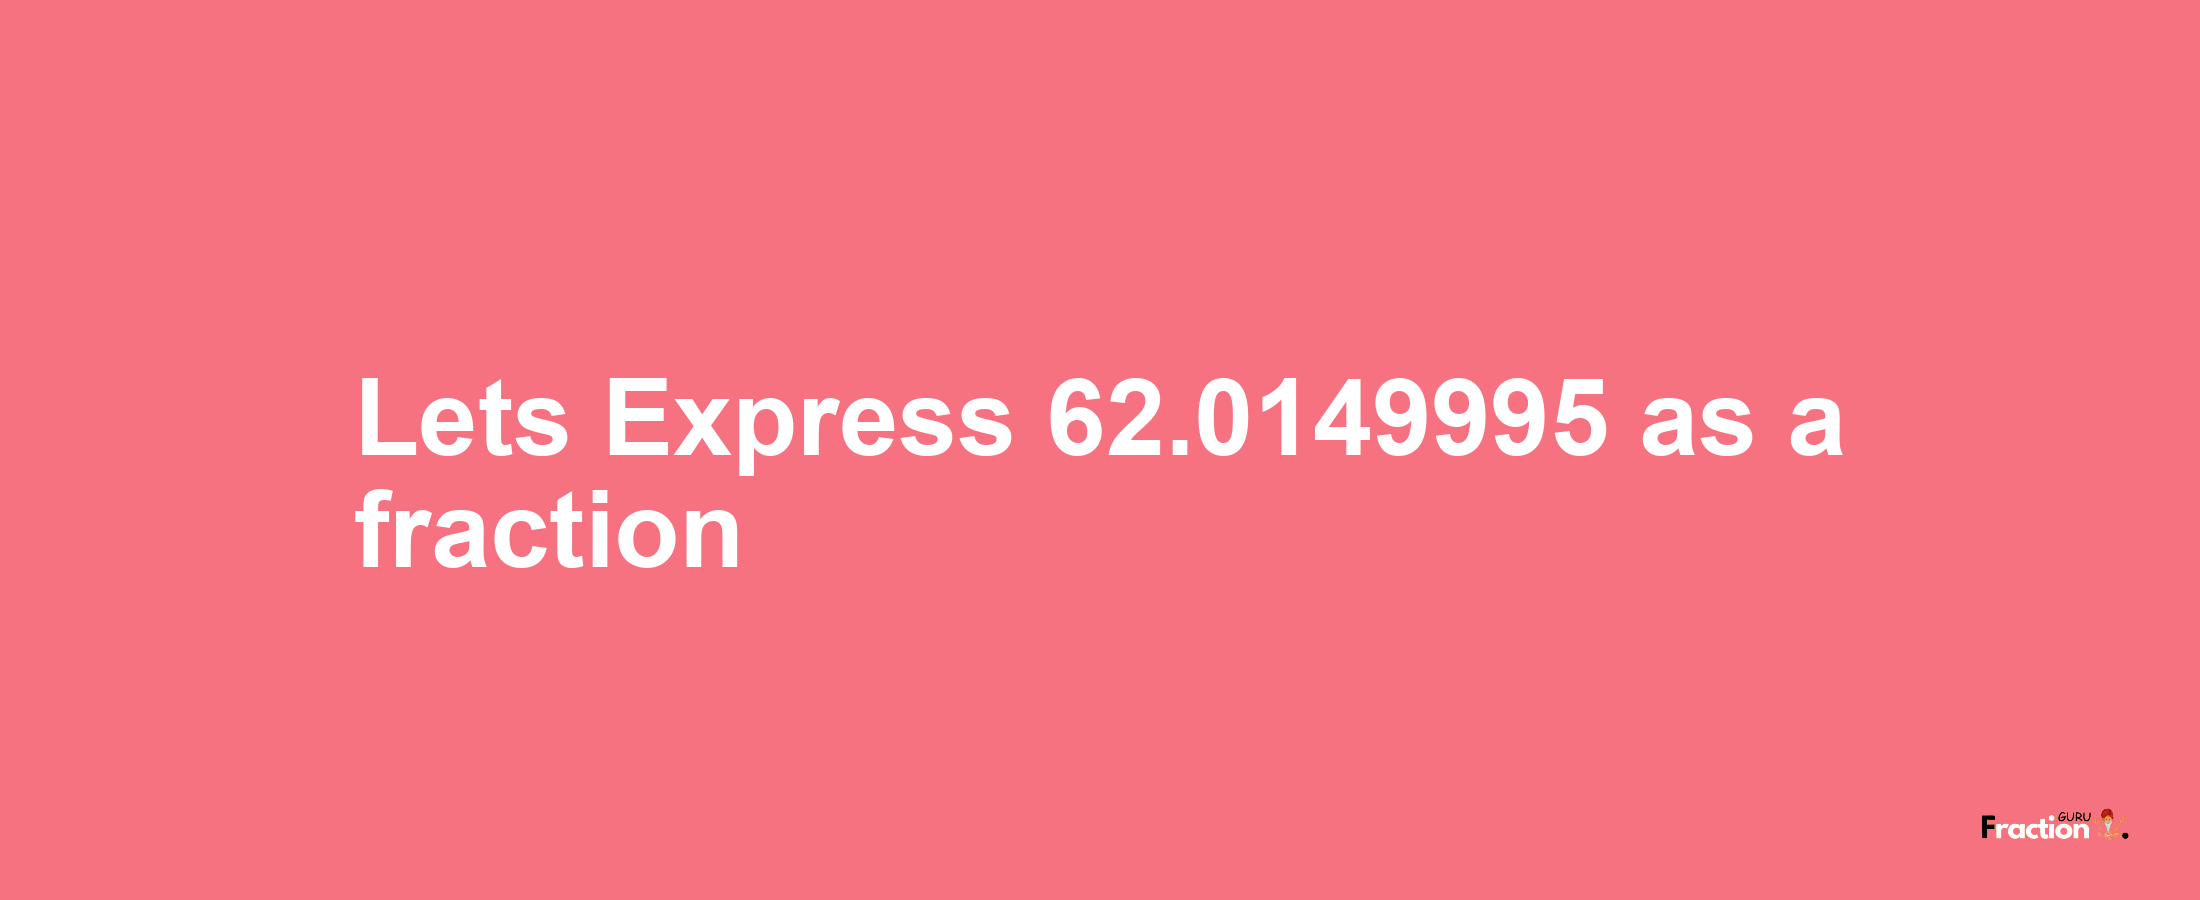 Lets Express 62.0149995 as afraction